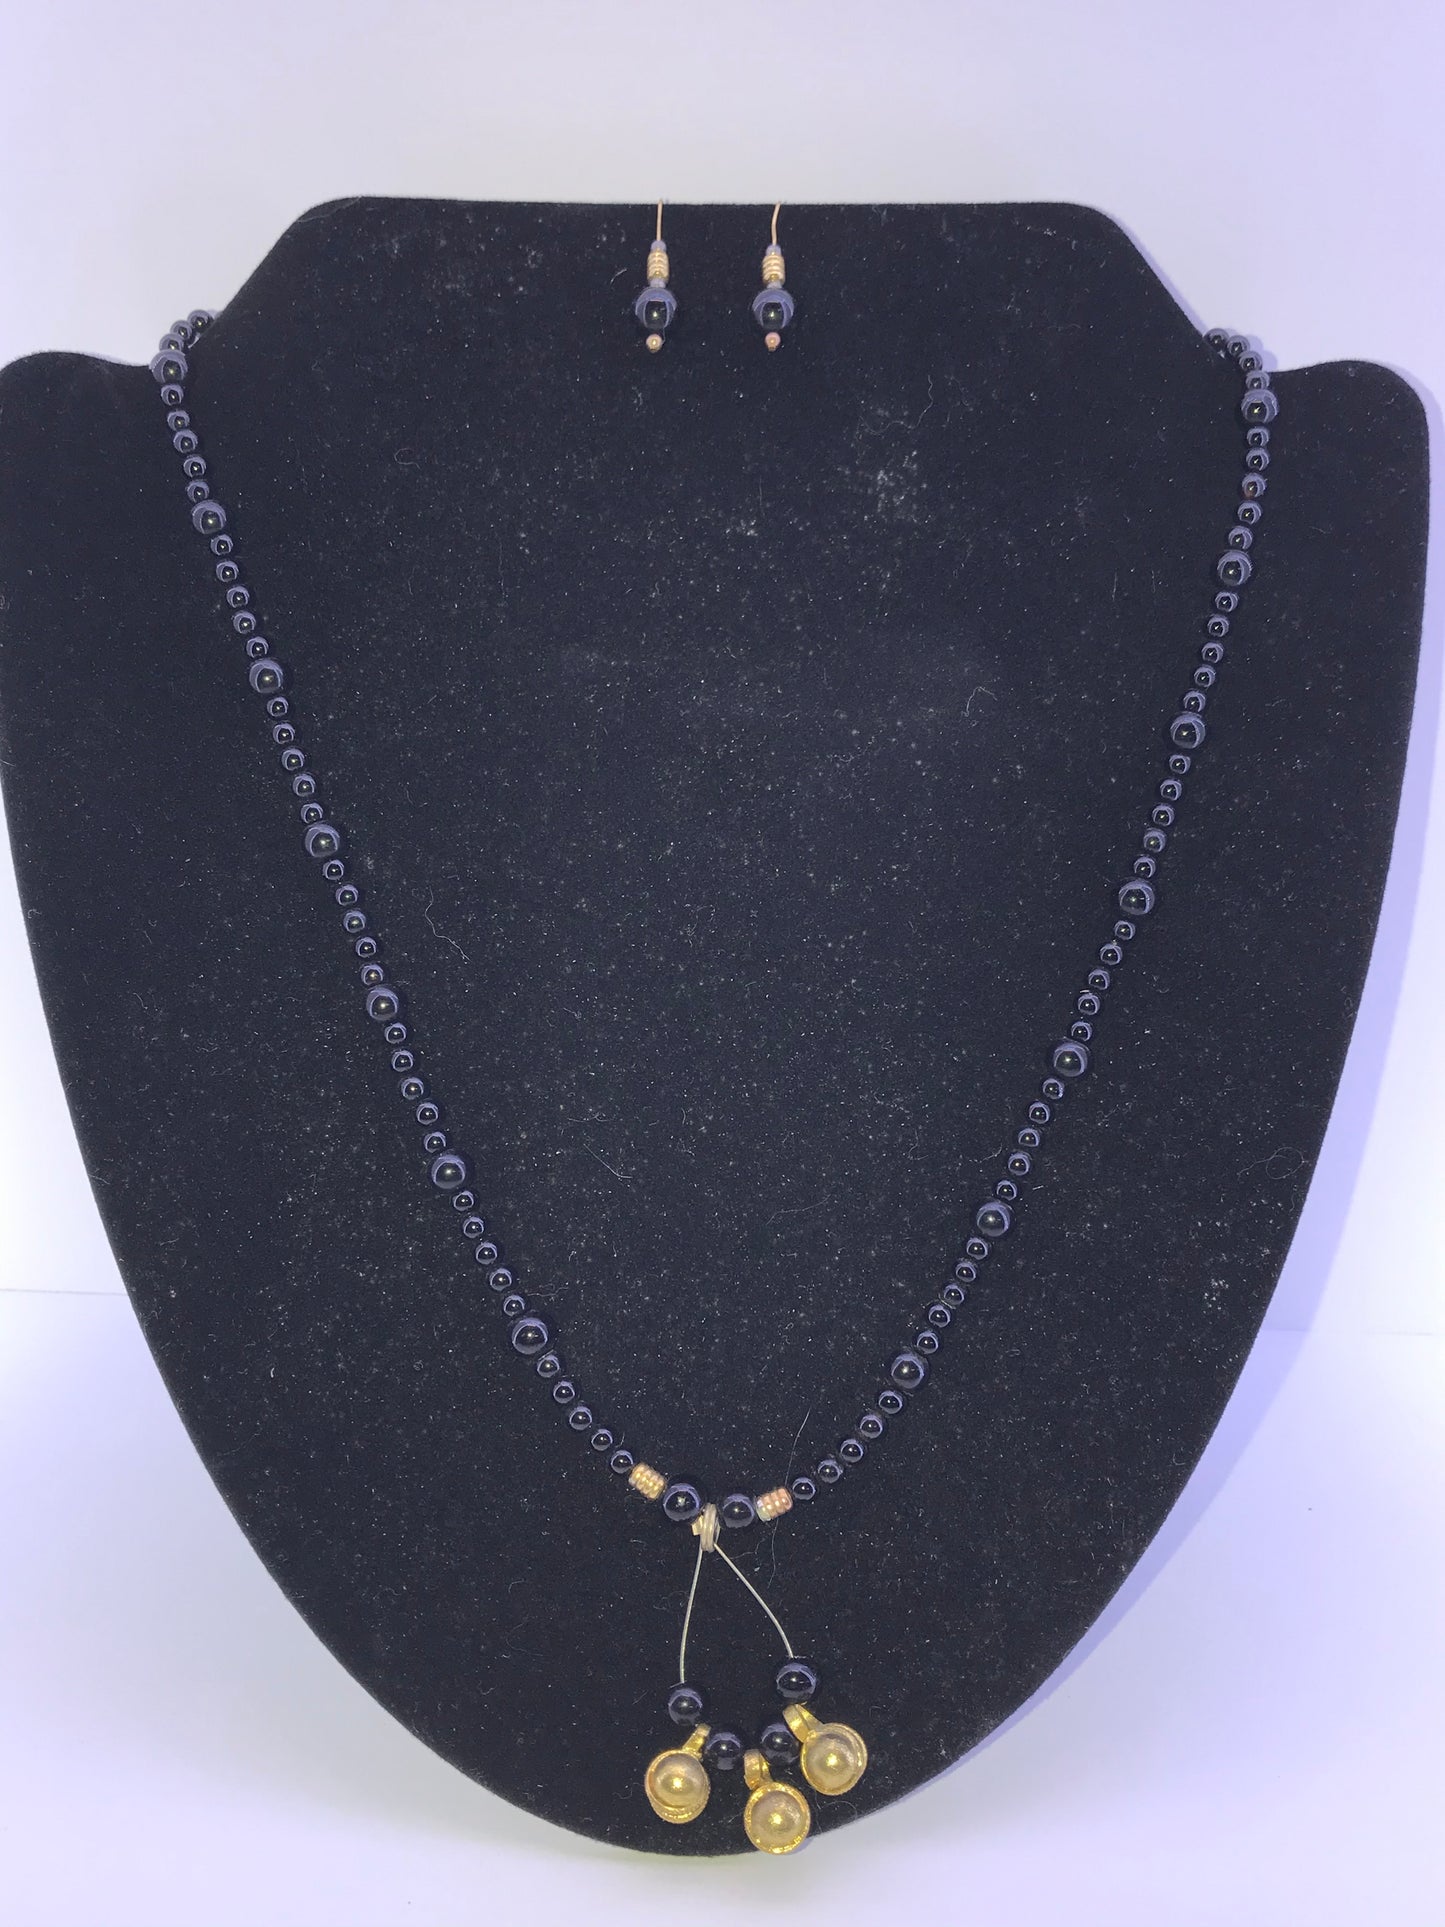 22" Long Onyx And Obsidian Beaded Necklace Set